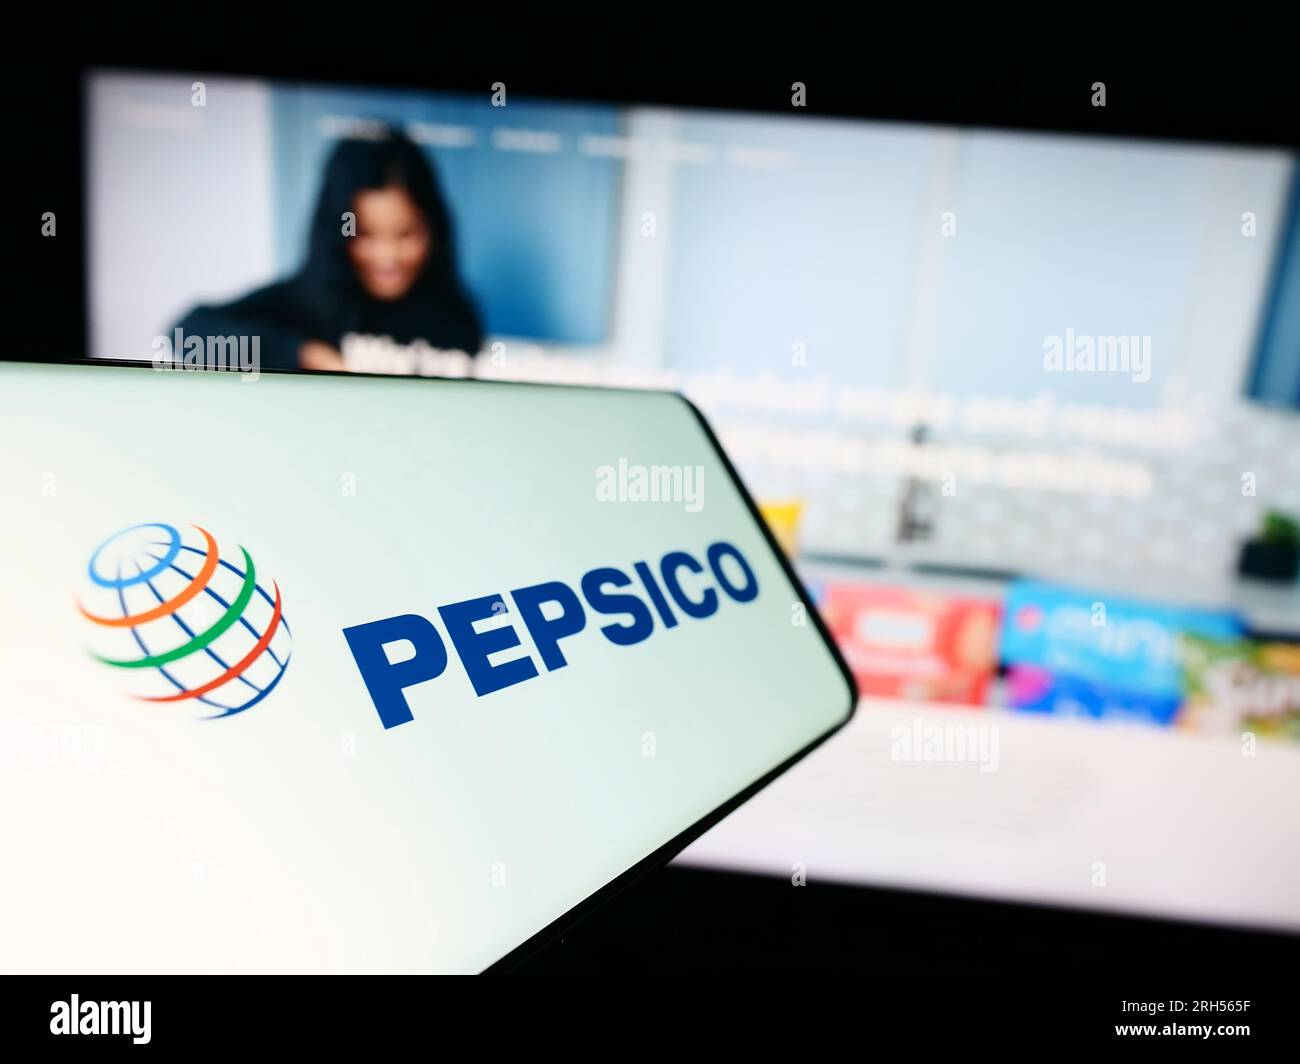 Mobile phone with logo of American beverage and snack company PepsiCo Inc. on screen in front of website. Focus on center-left of phone display. Stock Photo